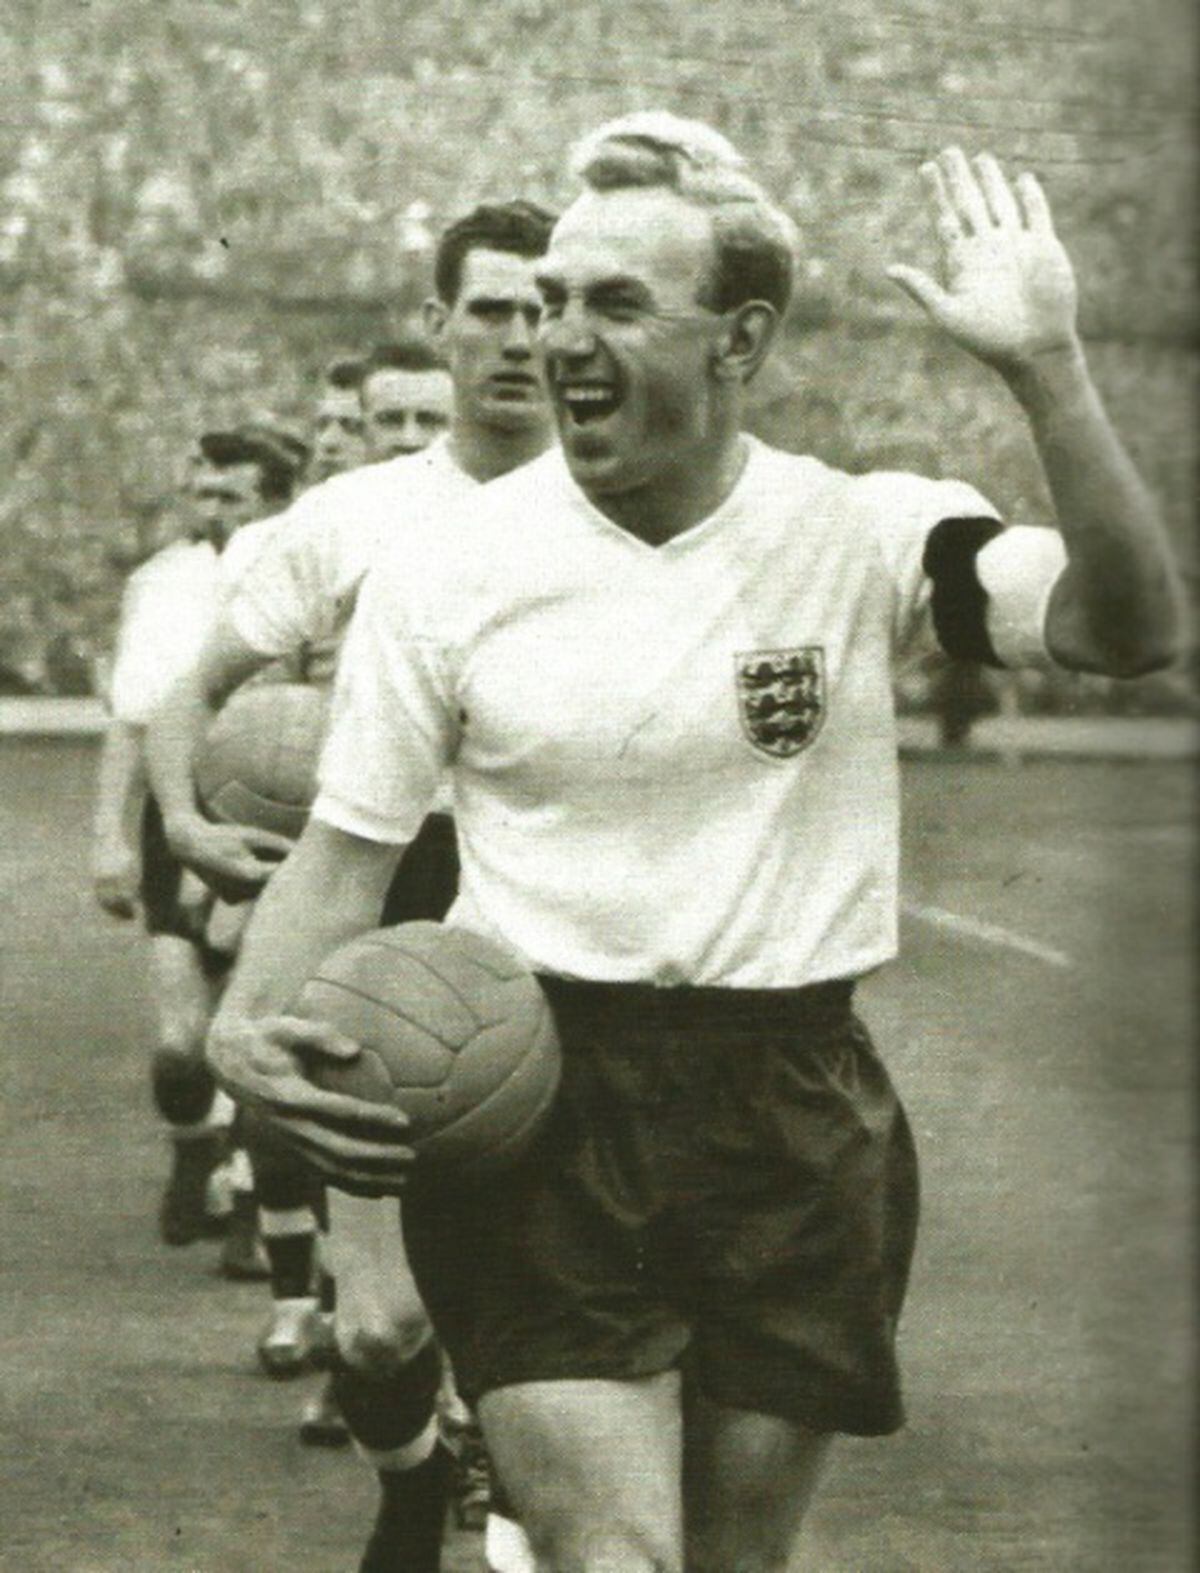 Billy Wright captained England and won 105 caps for his country